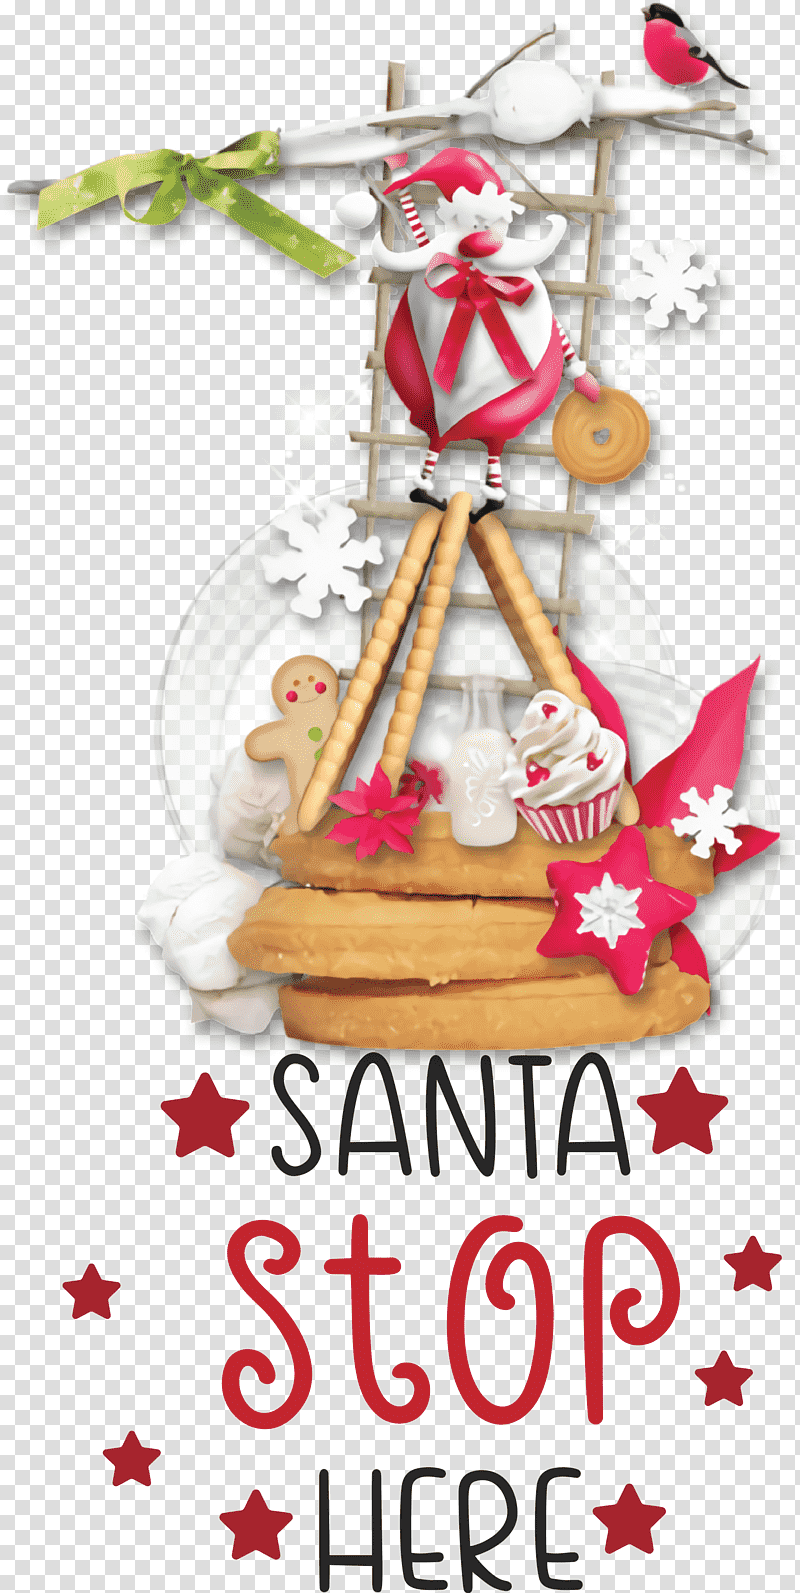 Santa Stop Here Santa Christmas, Christmas , Christmas Day, Christmas Tree, Holiday, Black, Highdefinition Video transparent background PNG clipart